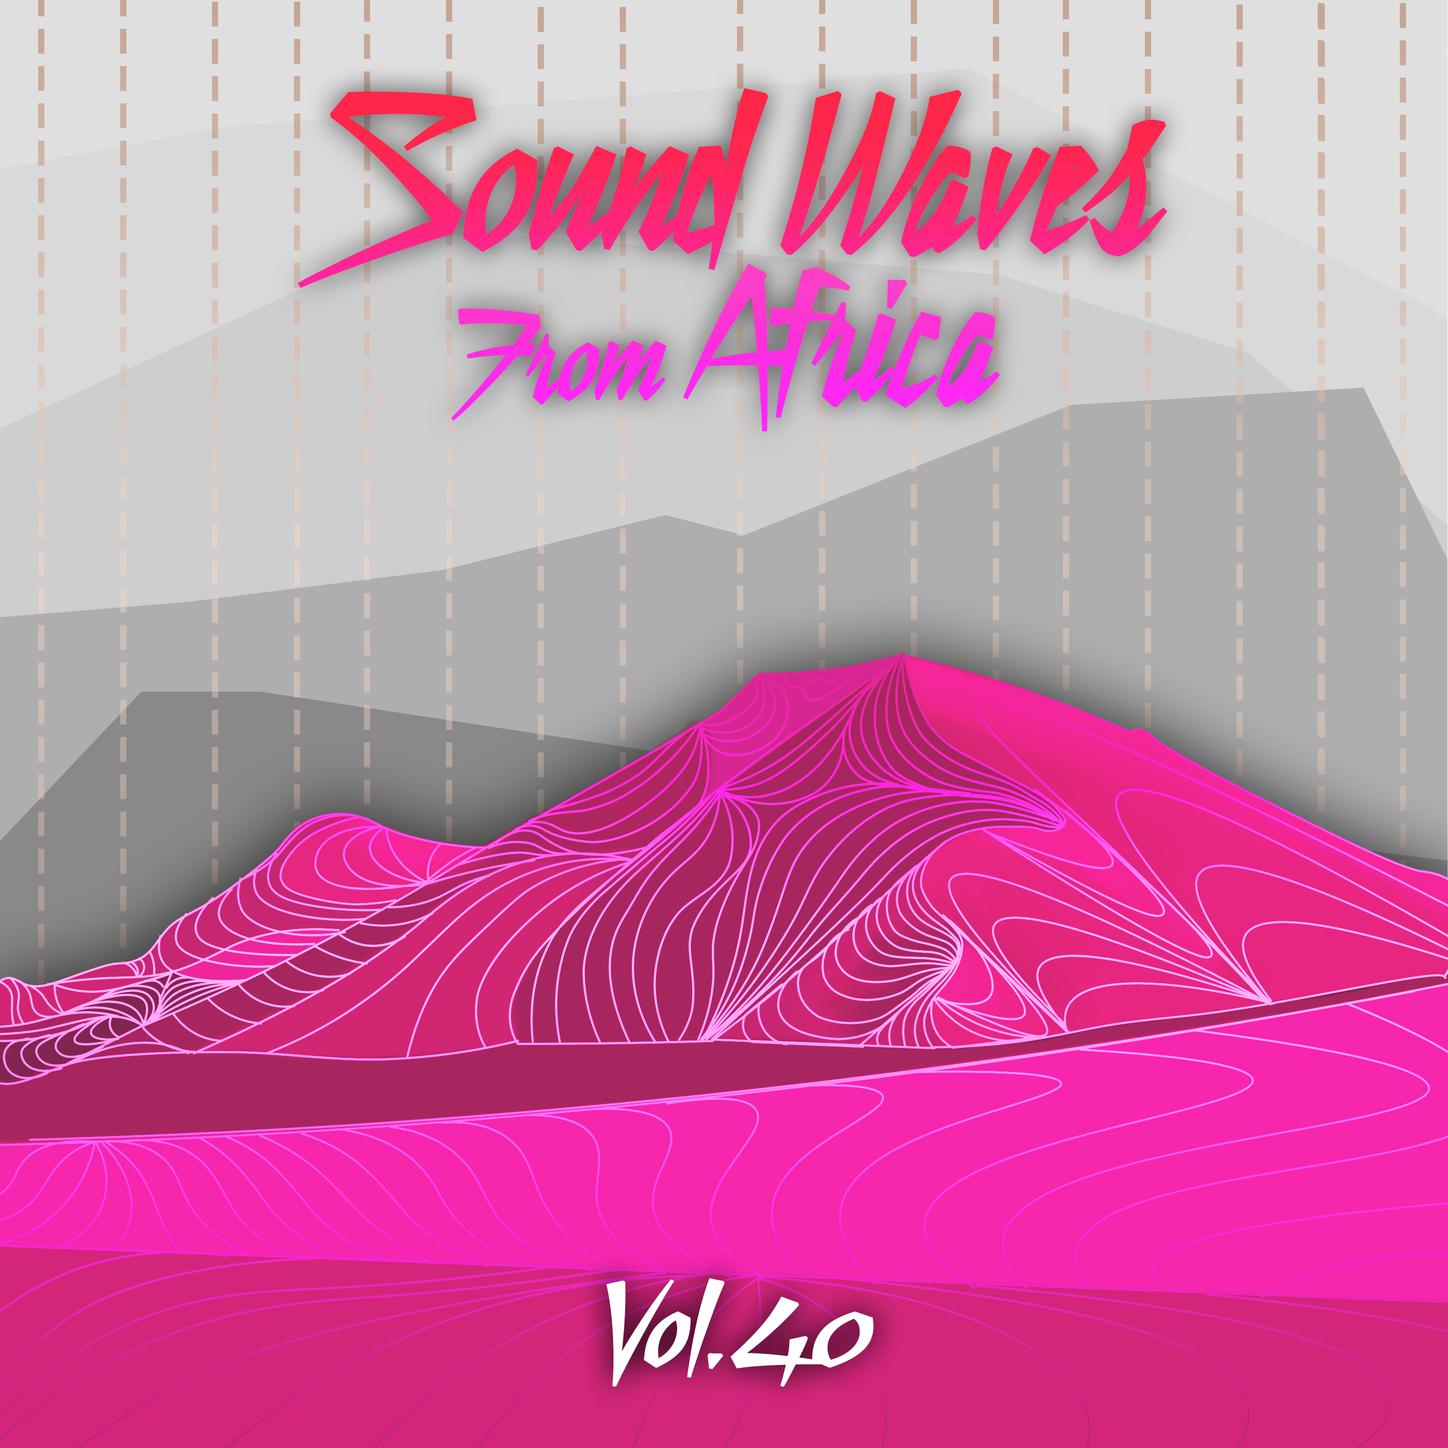 Sound Waves From Africa Vol. 40